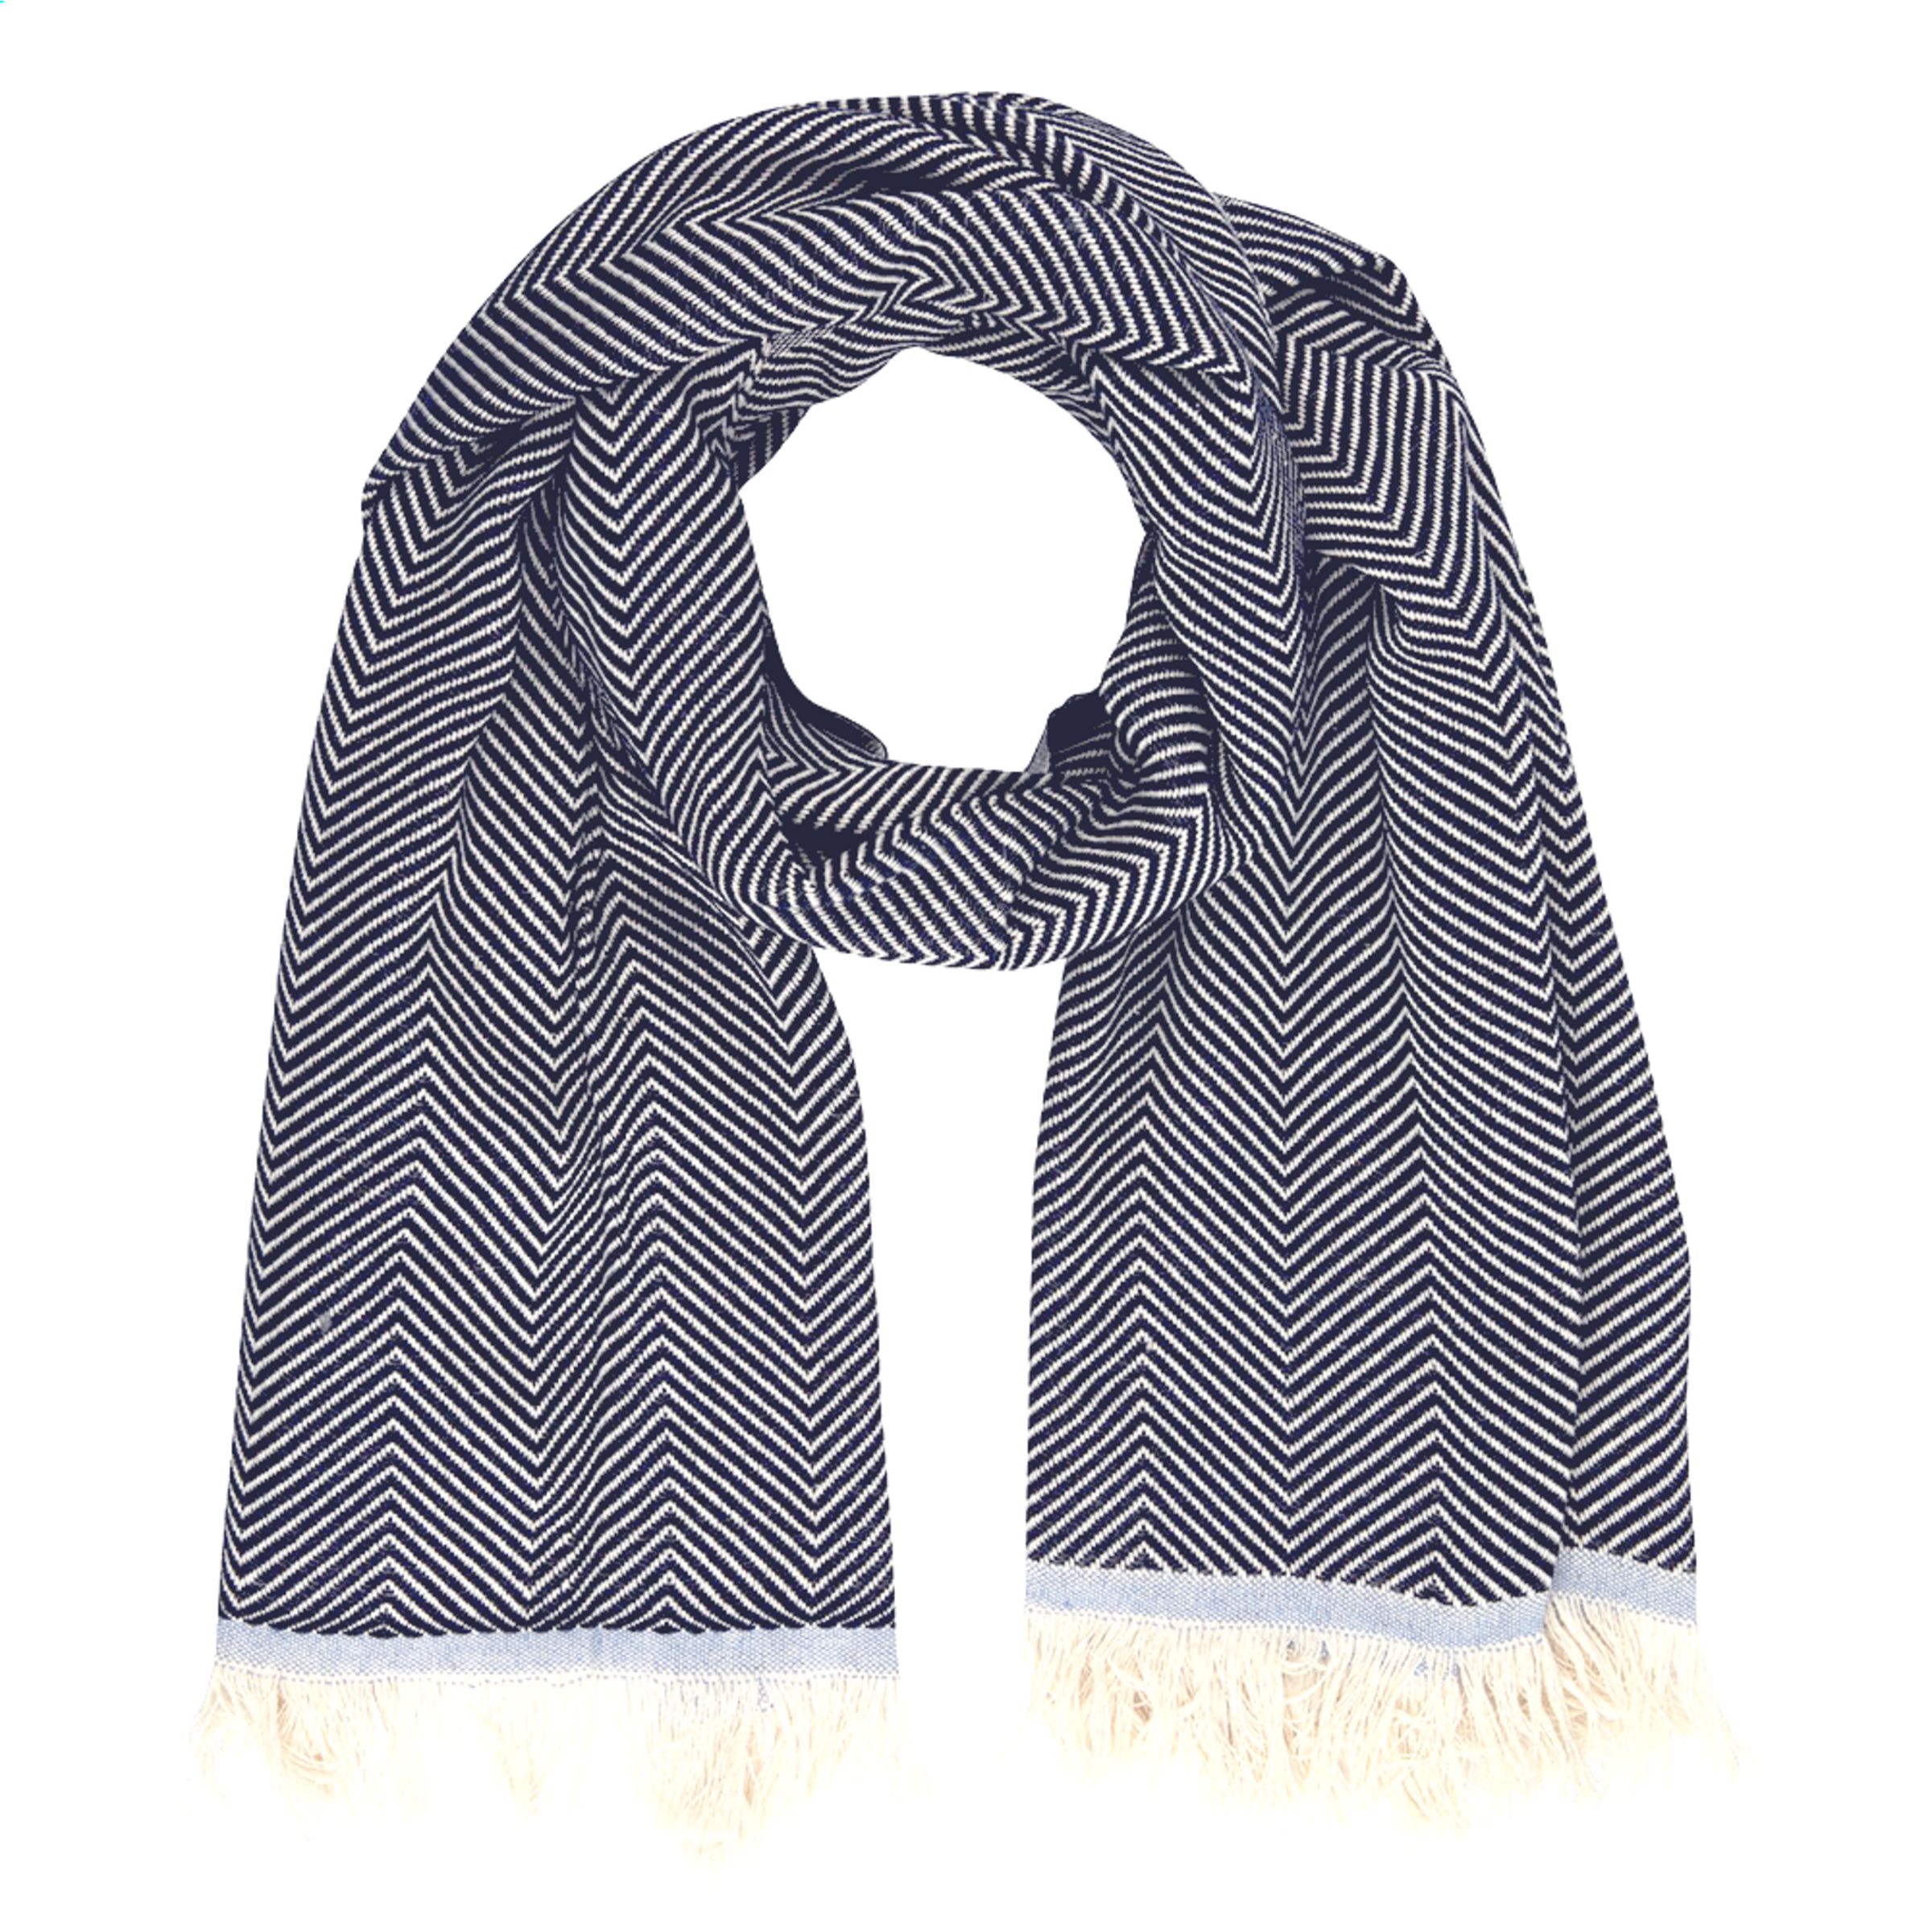 Herringbone Scarf by Oxious - Bourton-on-the-Water - Benbecula